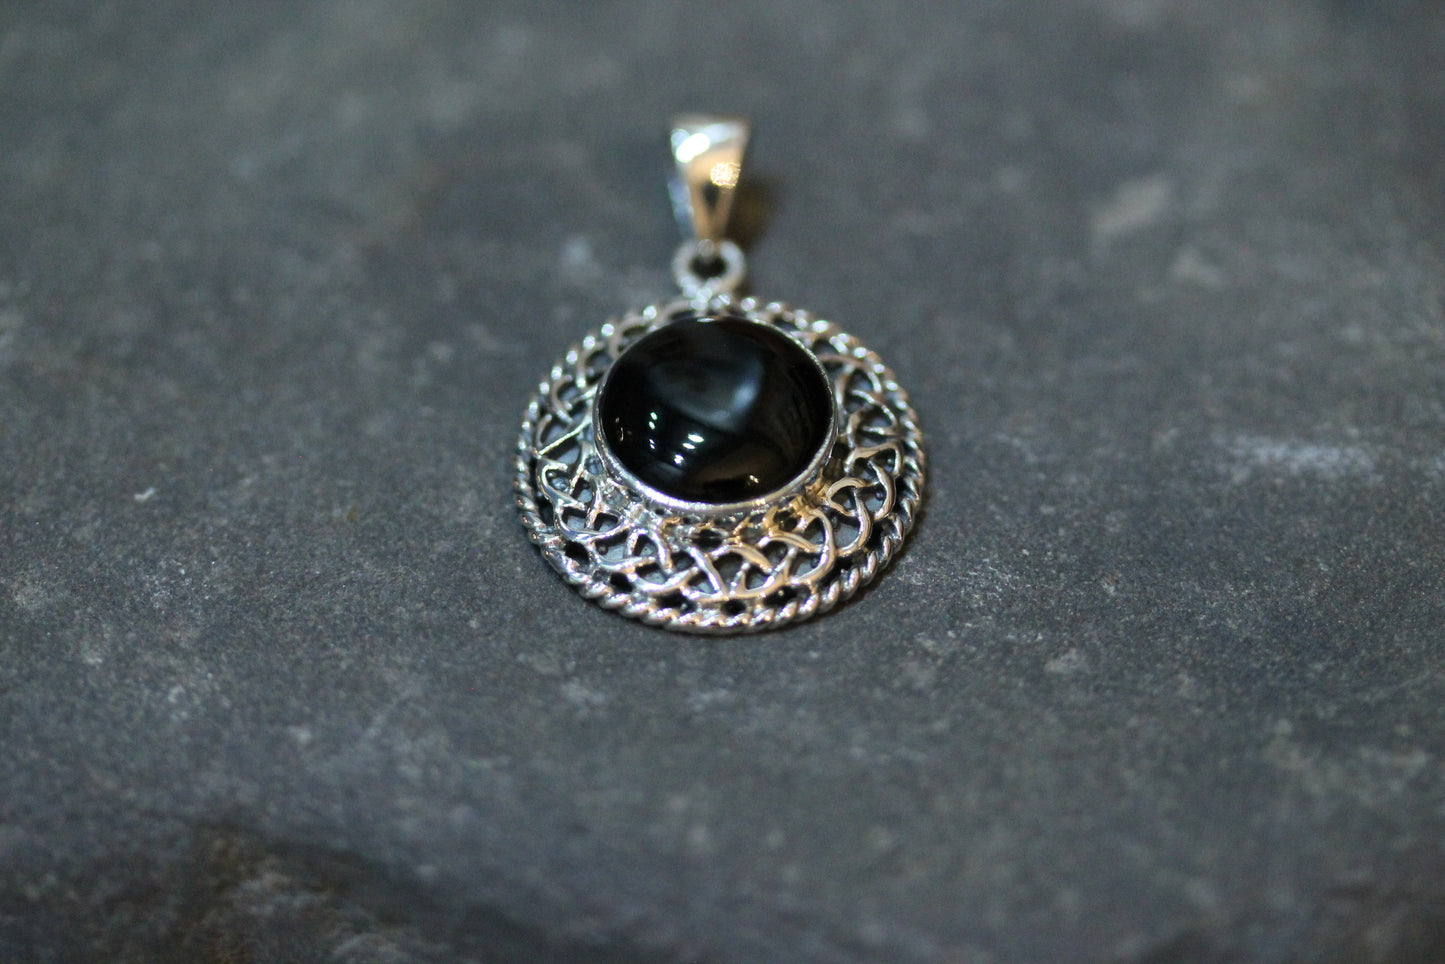 Celtic Stone Pendant - Round Knotted Border with Black Onyx